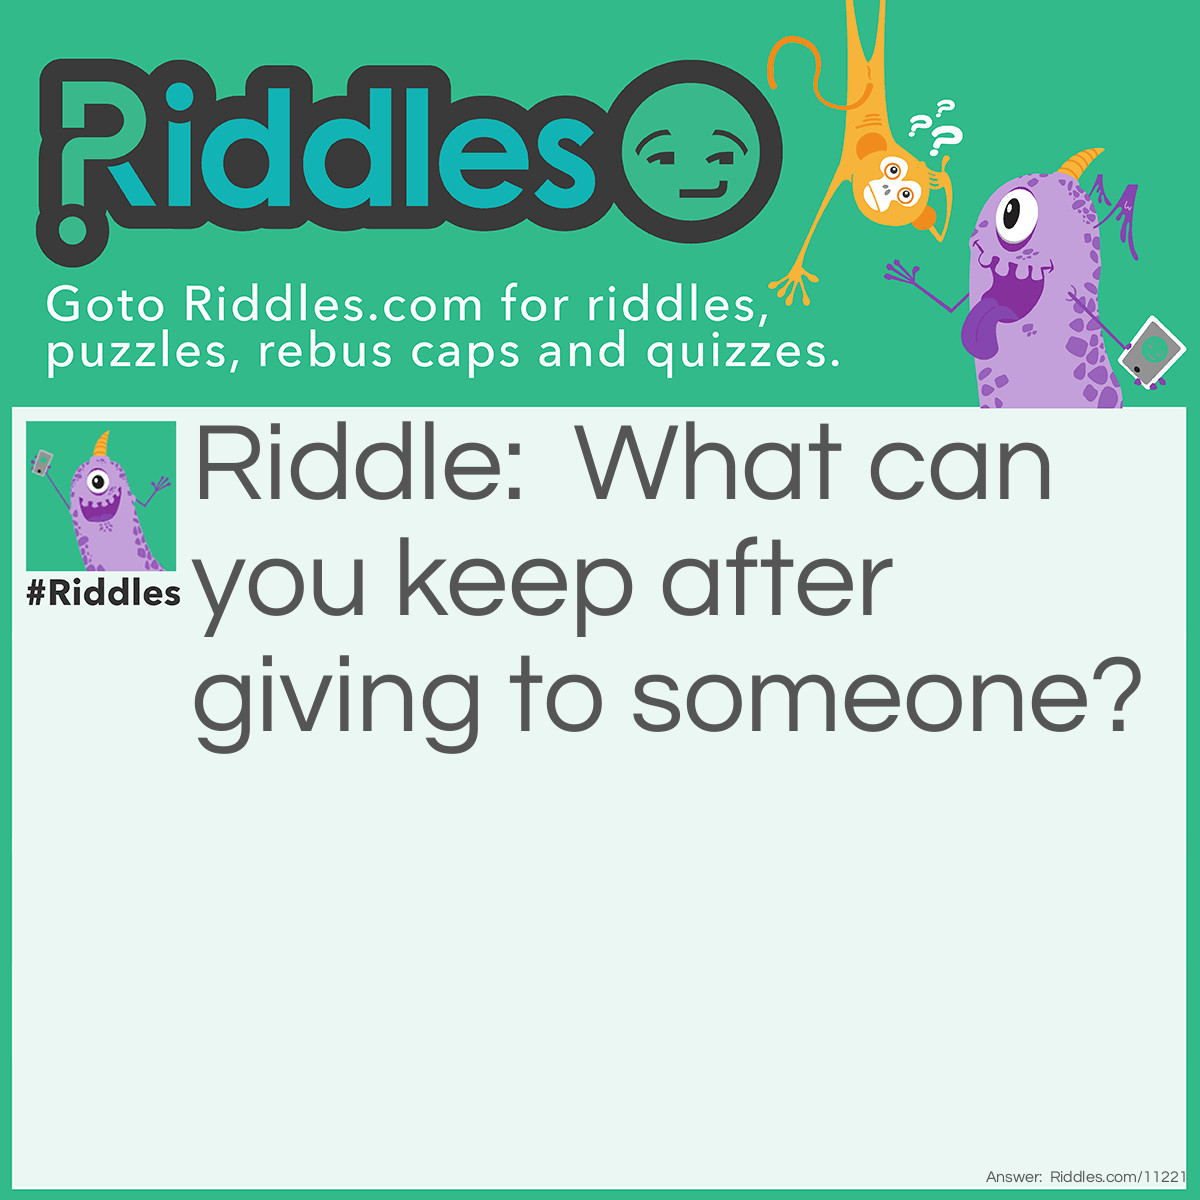 Riddle: What can you keep after giving to someone? Answer: Your word